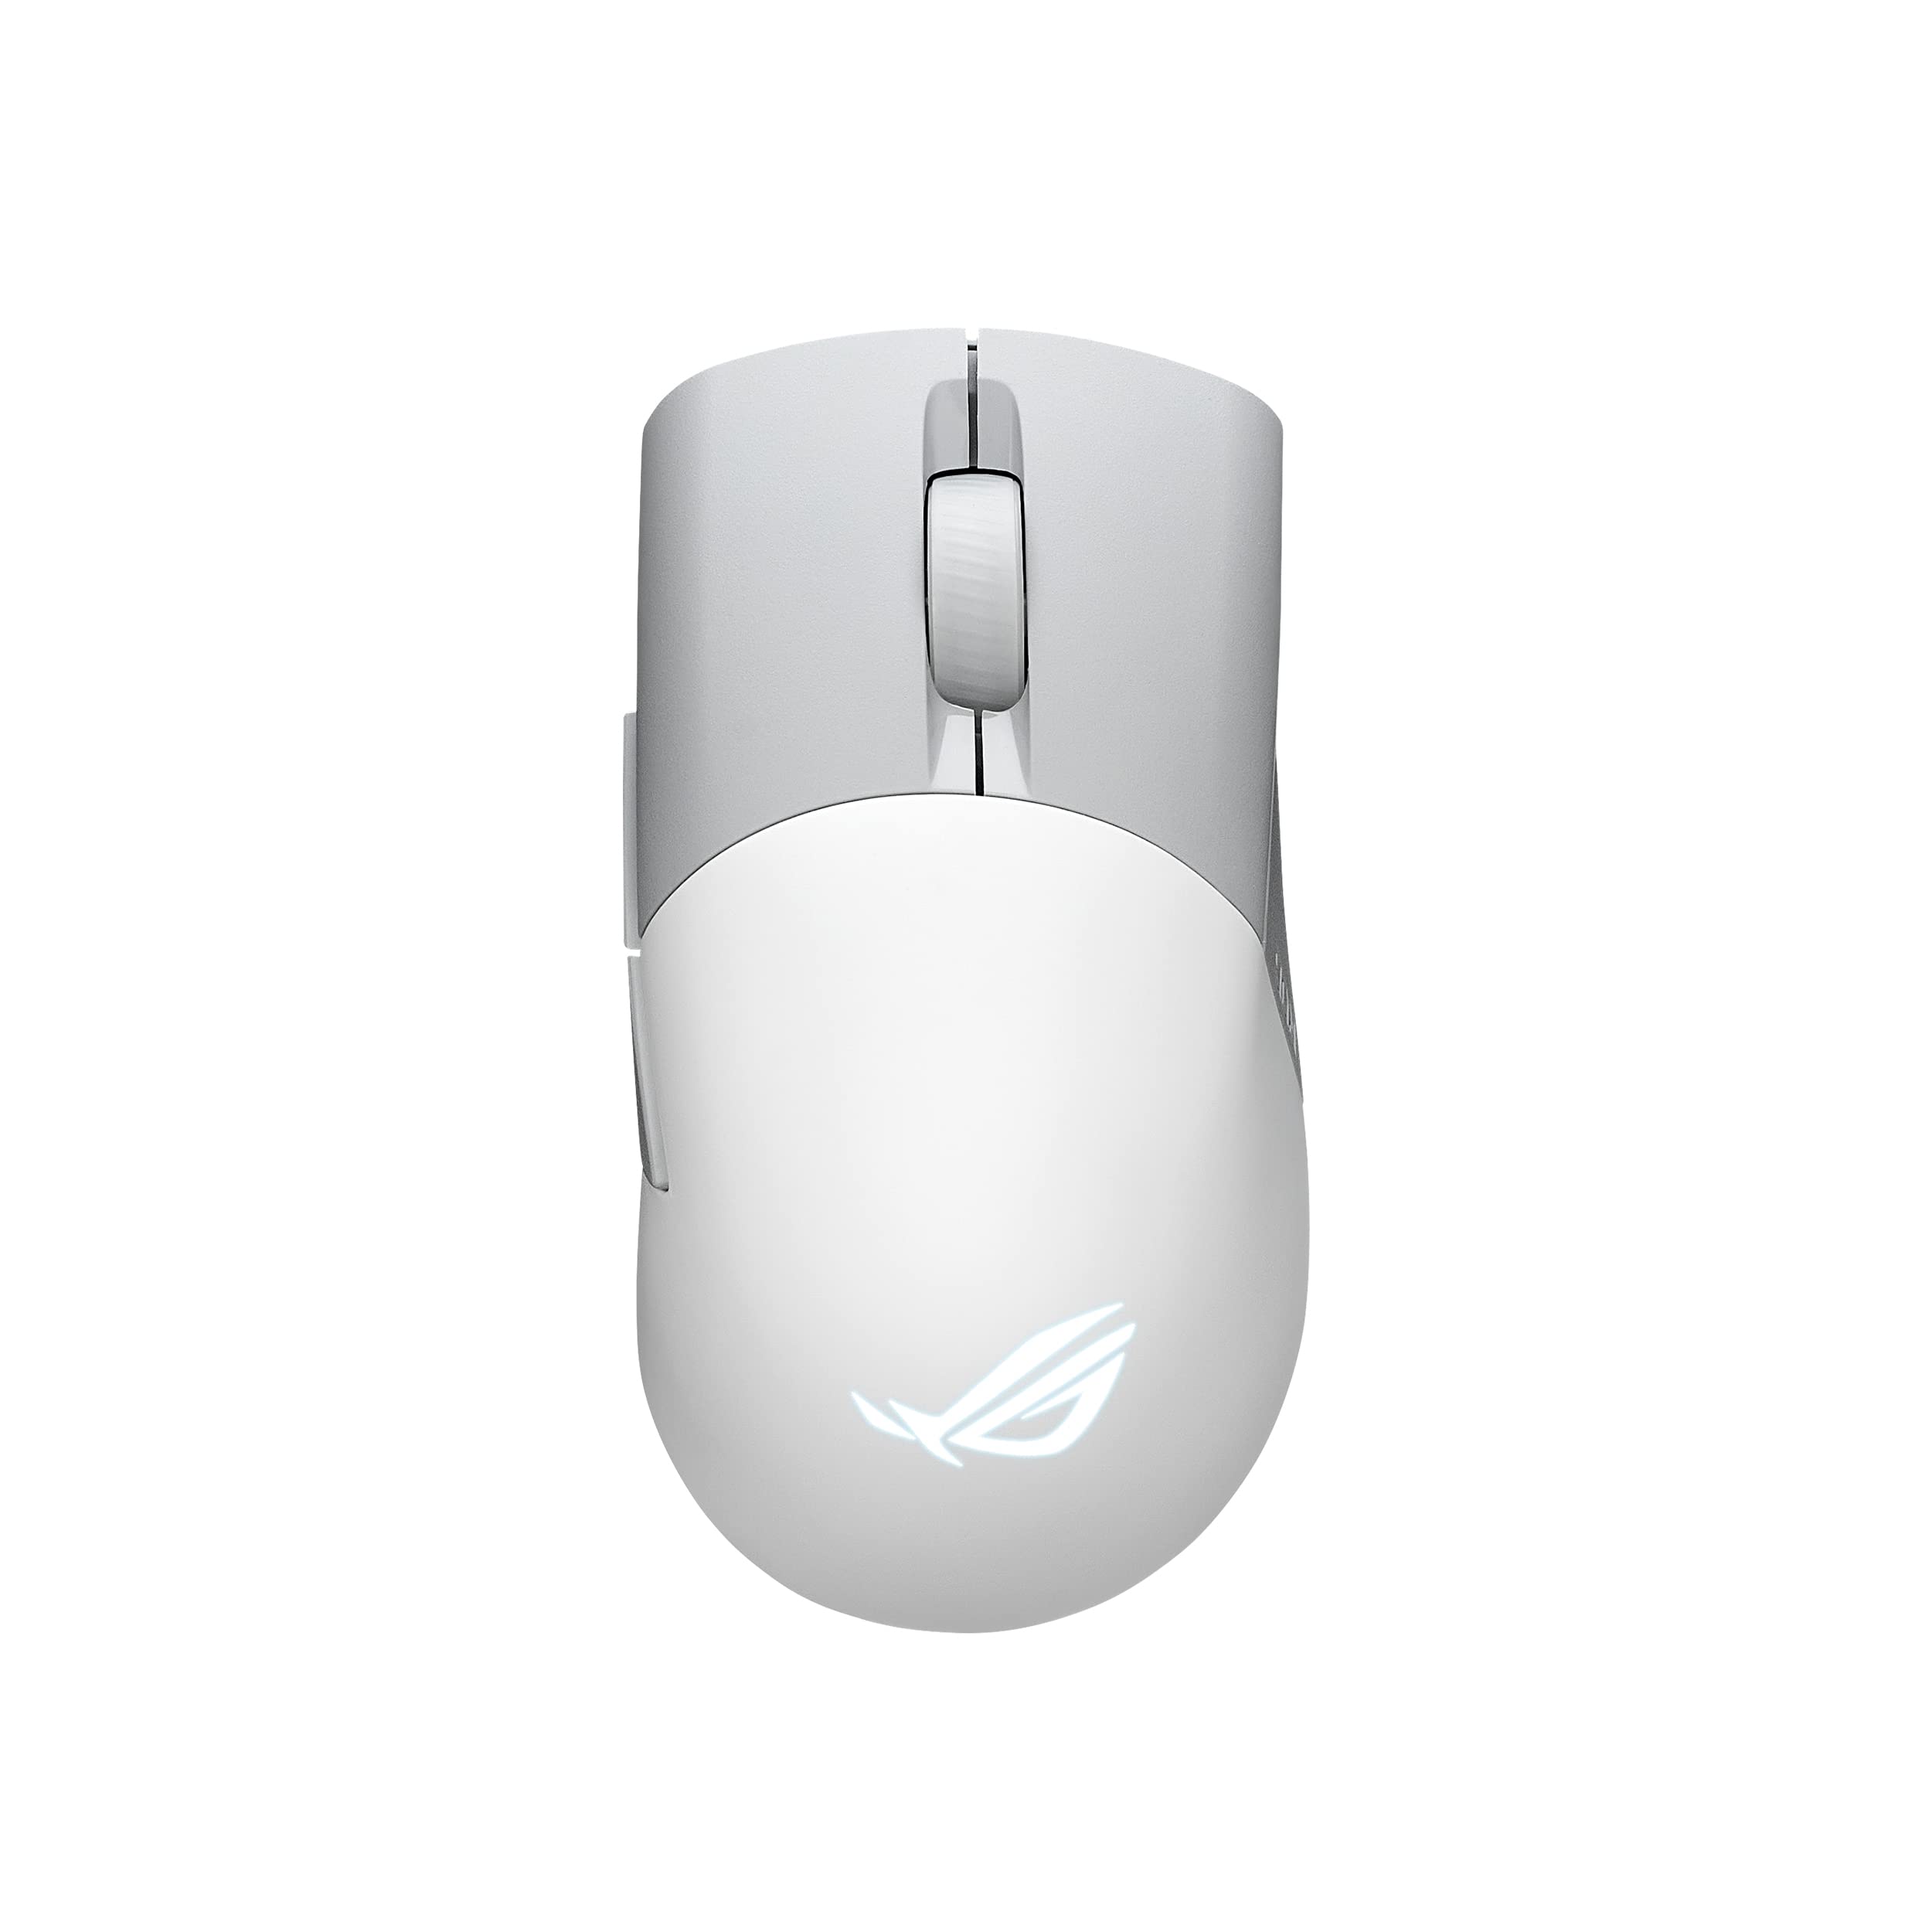 Asus ROG Keris Wireless AimPoint Gaming Mouse, Tri-mode connectivity (2.4GHz RF, Bluetooth, Wired), 36000 DPI sensor, 5 programmable buttons, ROG SpeedNova, Replaceable switches, Paracord cable, White